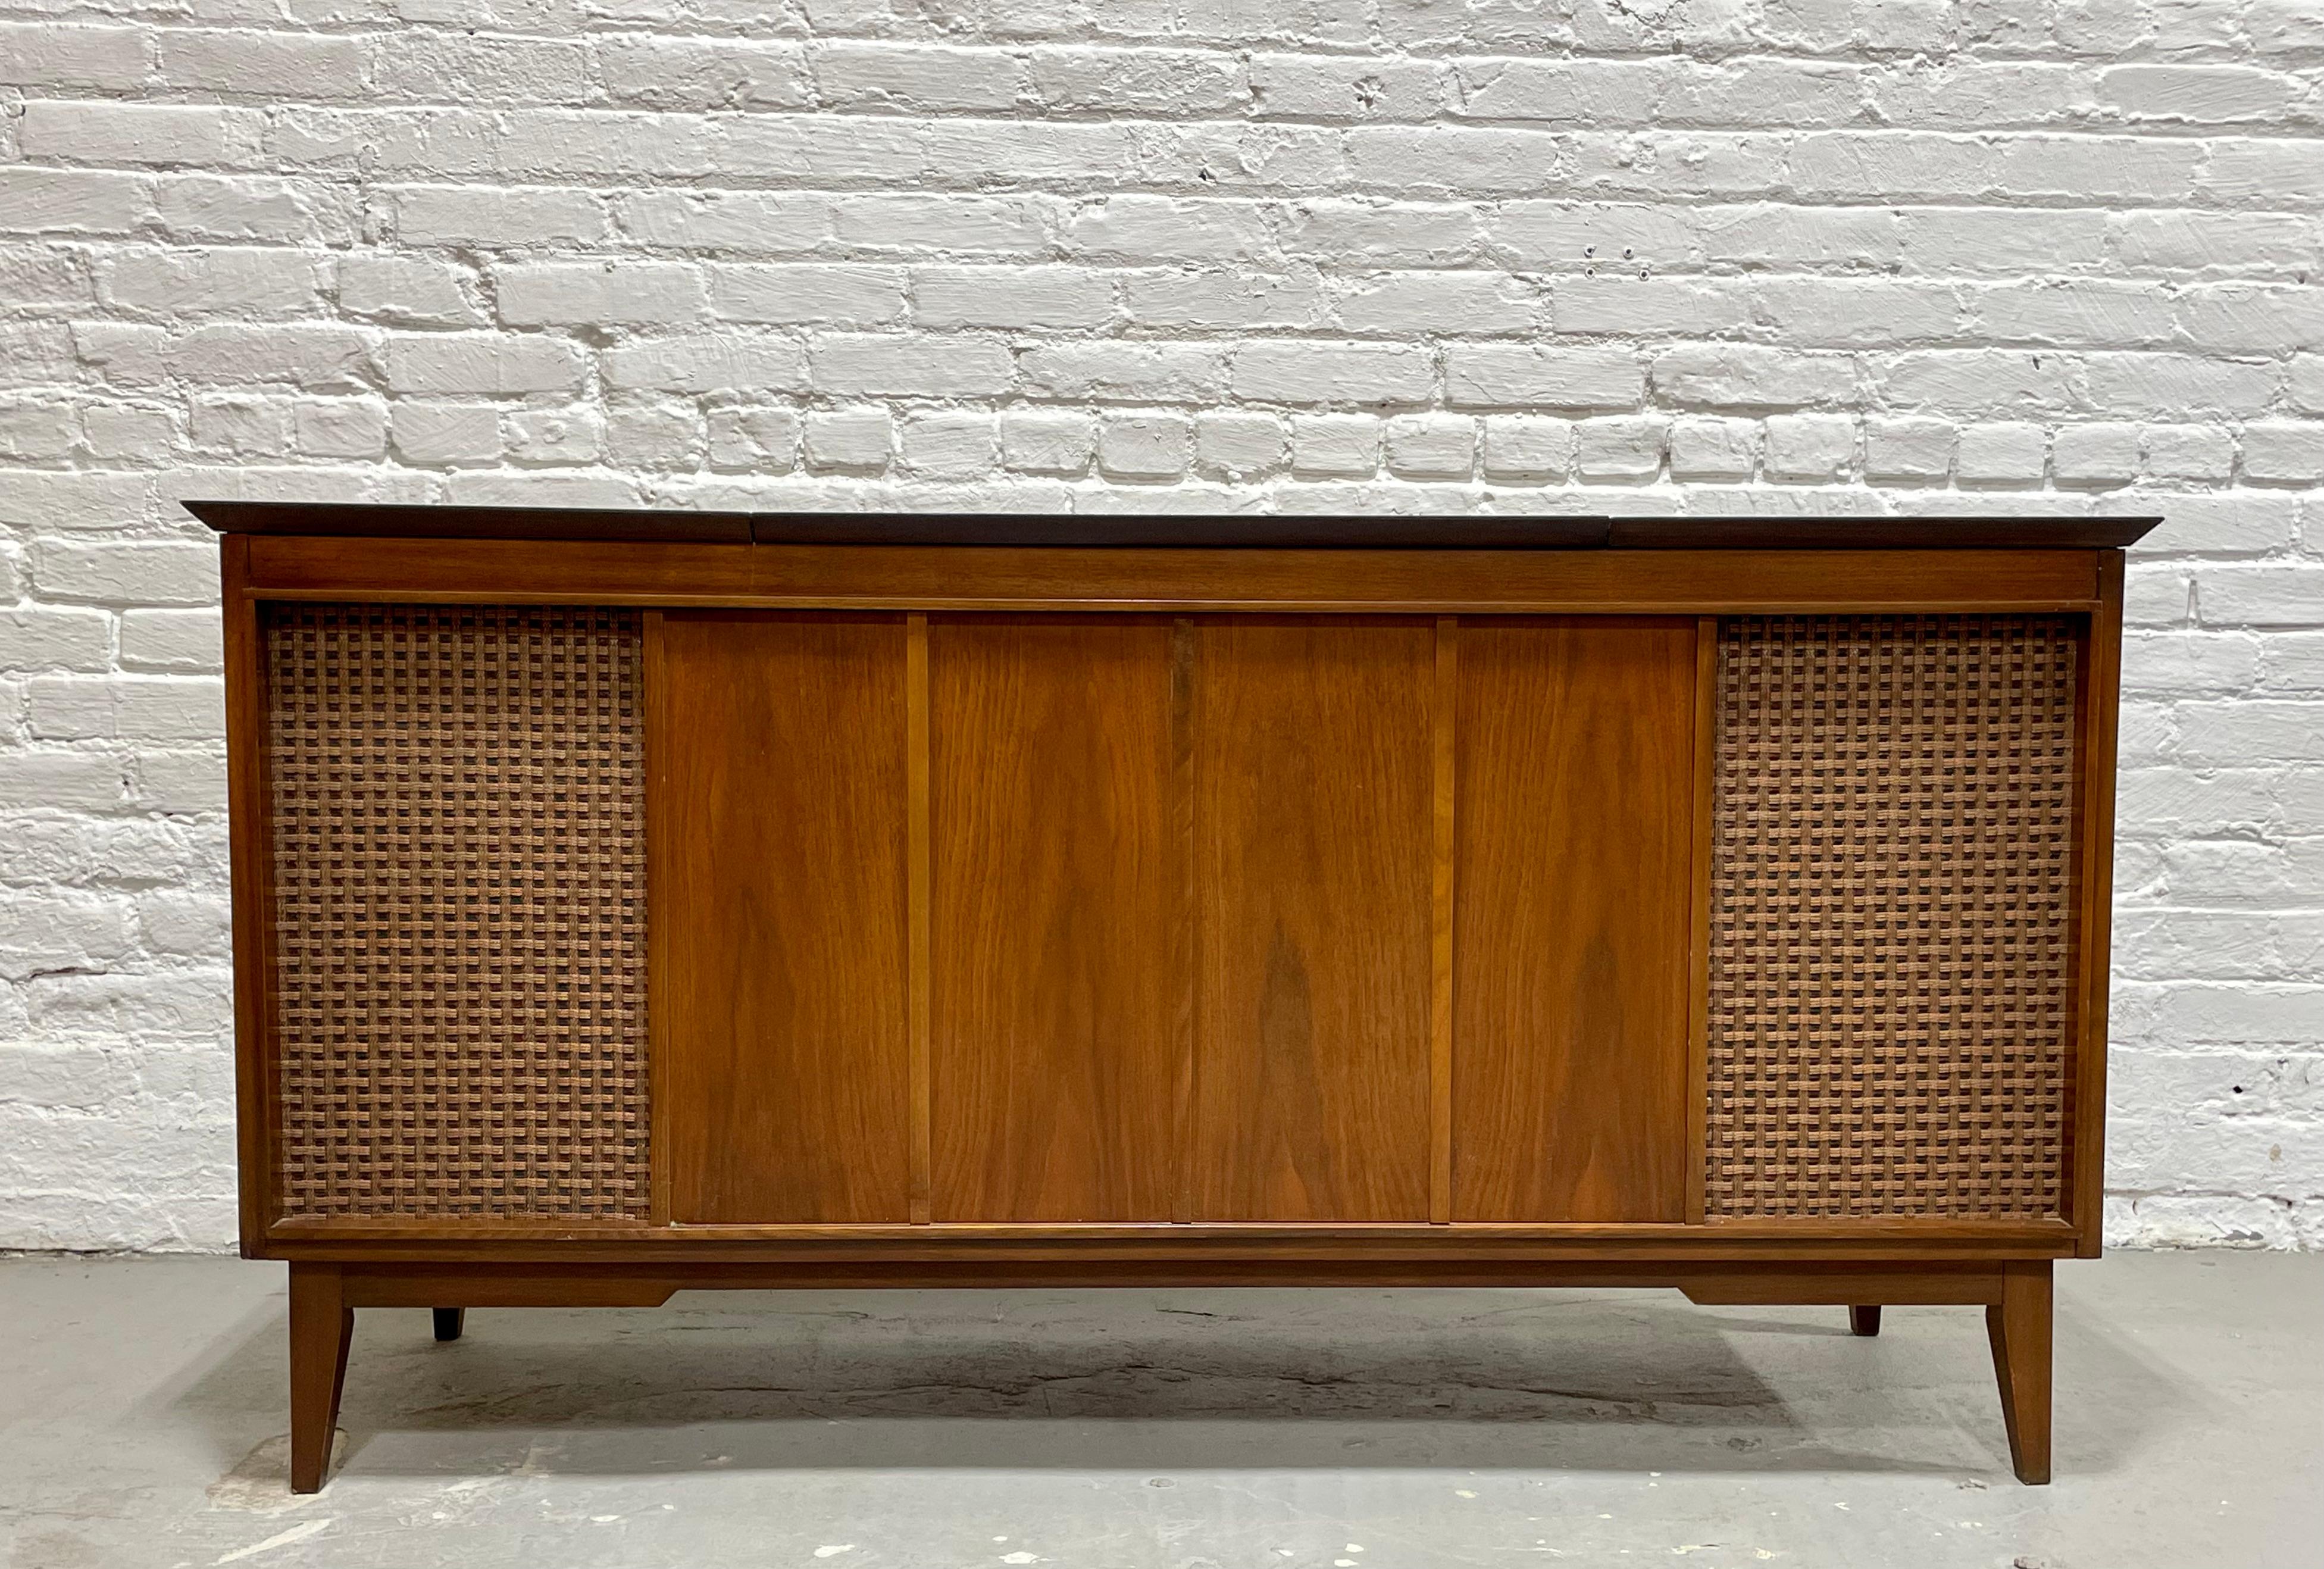 Mid Century Modern FULLY FUNCTIONING Walnut Fischer Diplomat Stereo Console / Credenza, c. 1960's. This rare and sought after piece is fully functioning with incredible sound and features a Fischer turntable, stereo and speakers behind the original